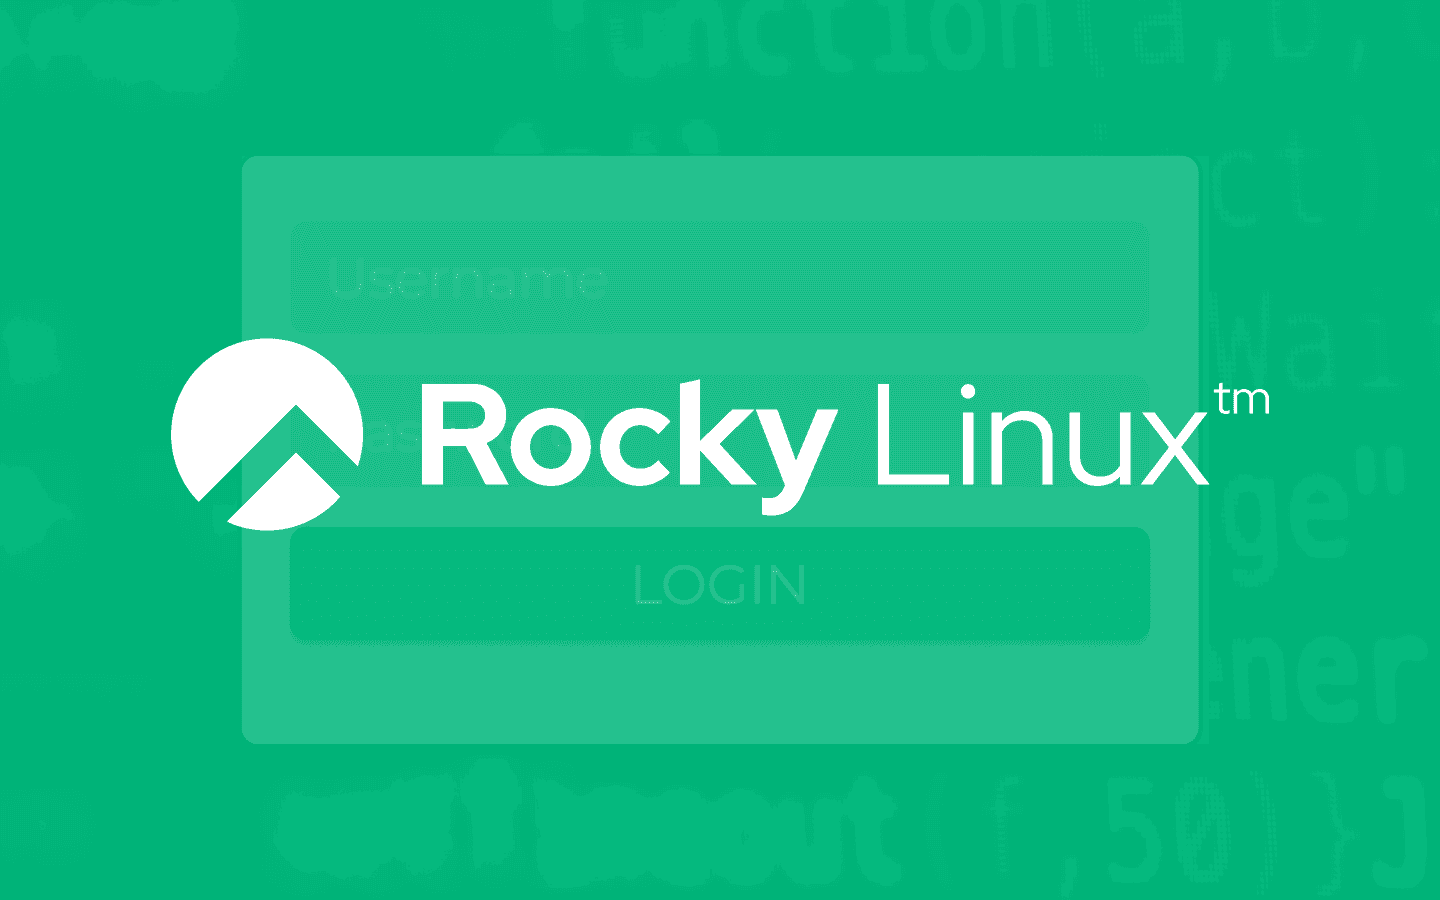 How to Add Users and Groups from the Command Line in Rocky Linux